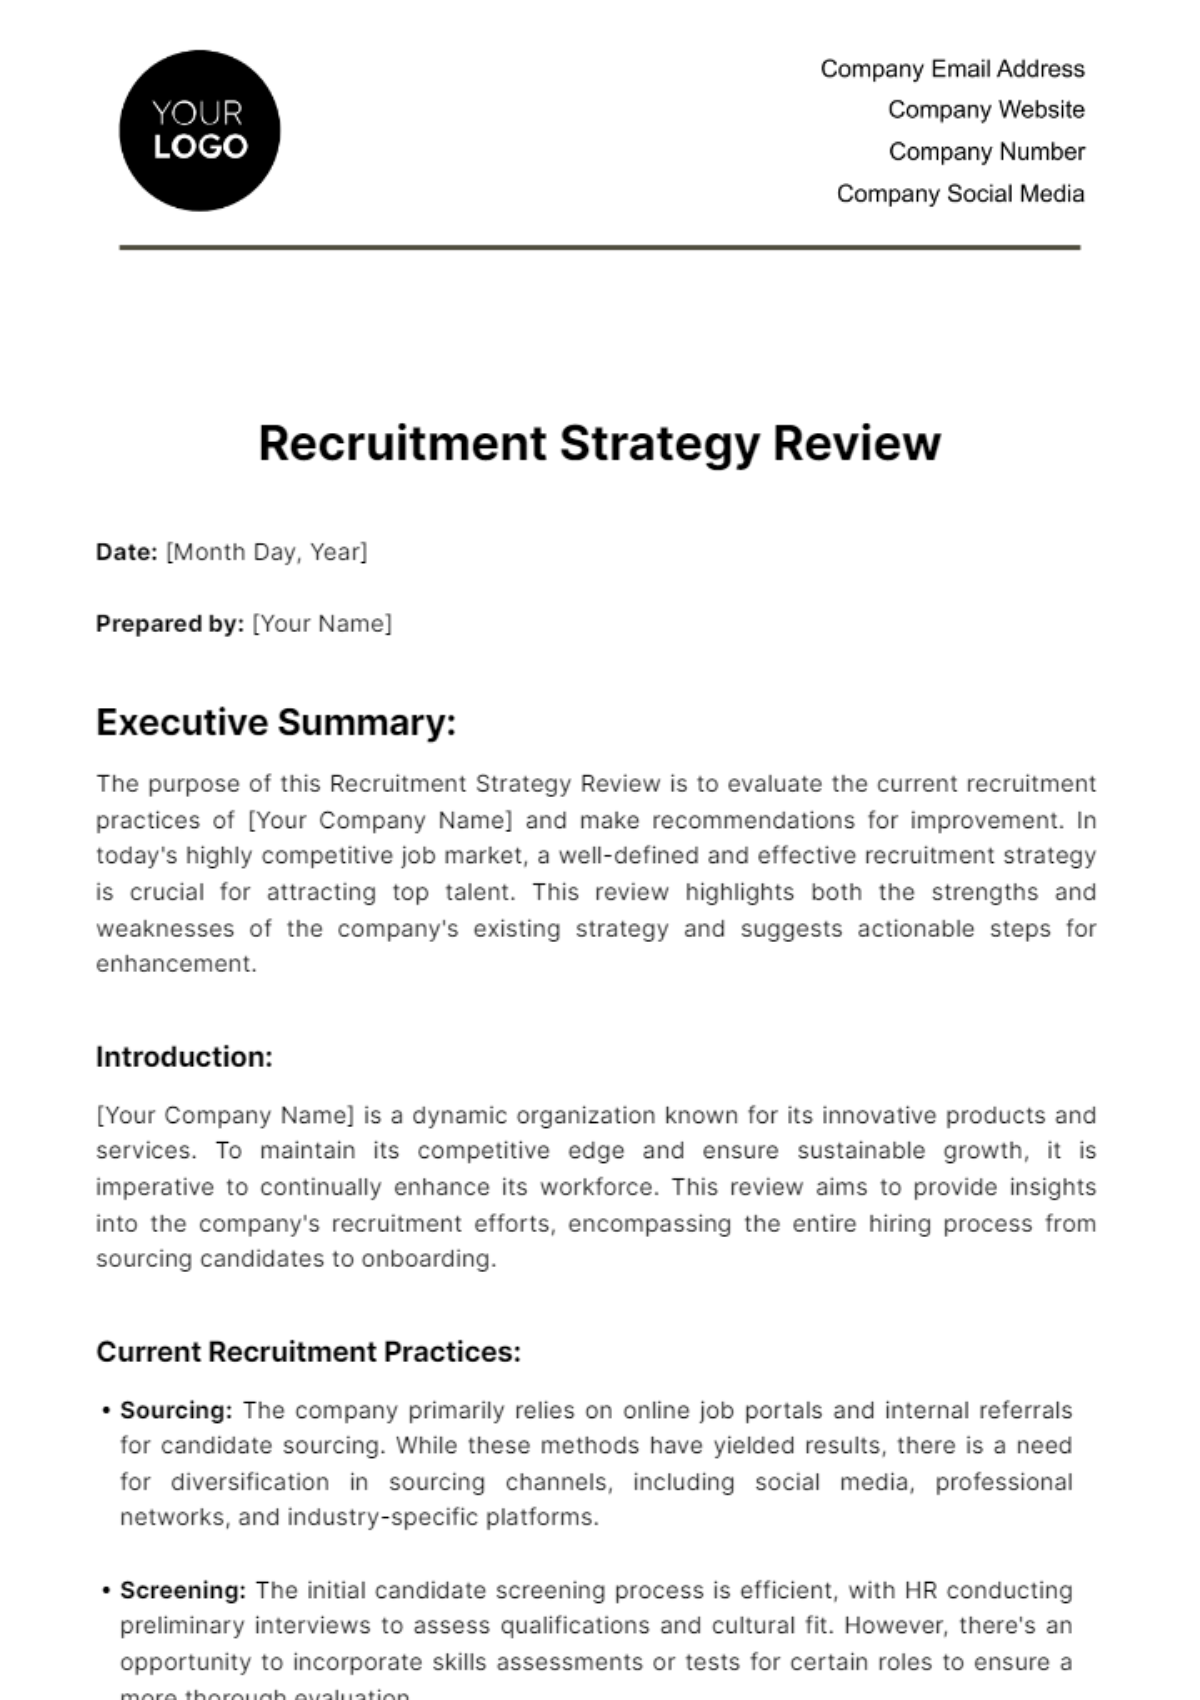 Recruitment Strategy Review HR Template